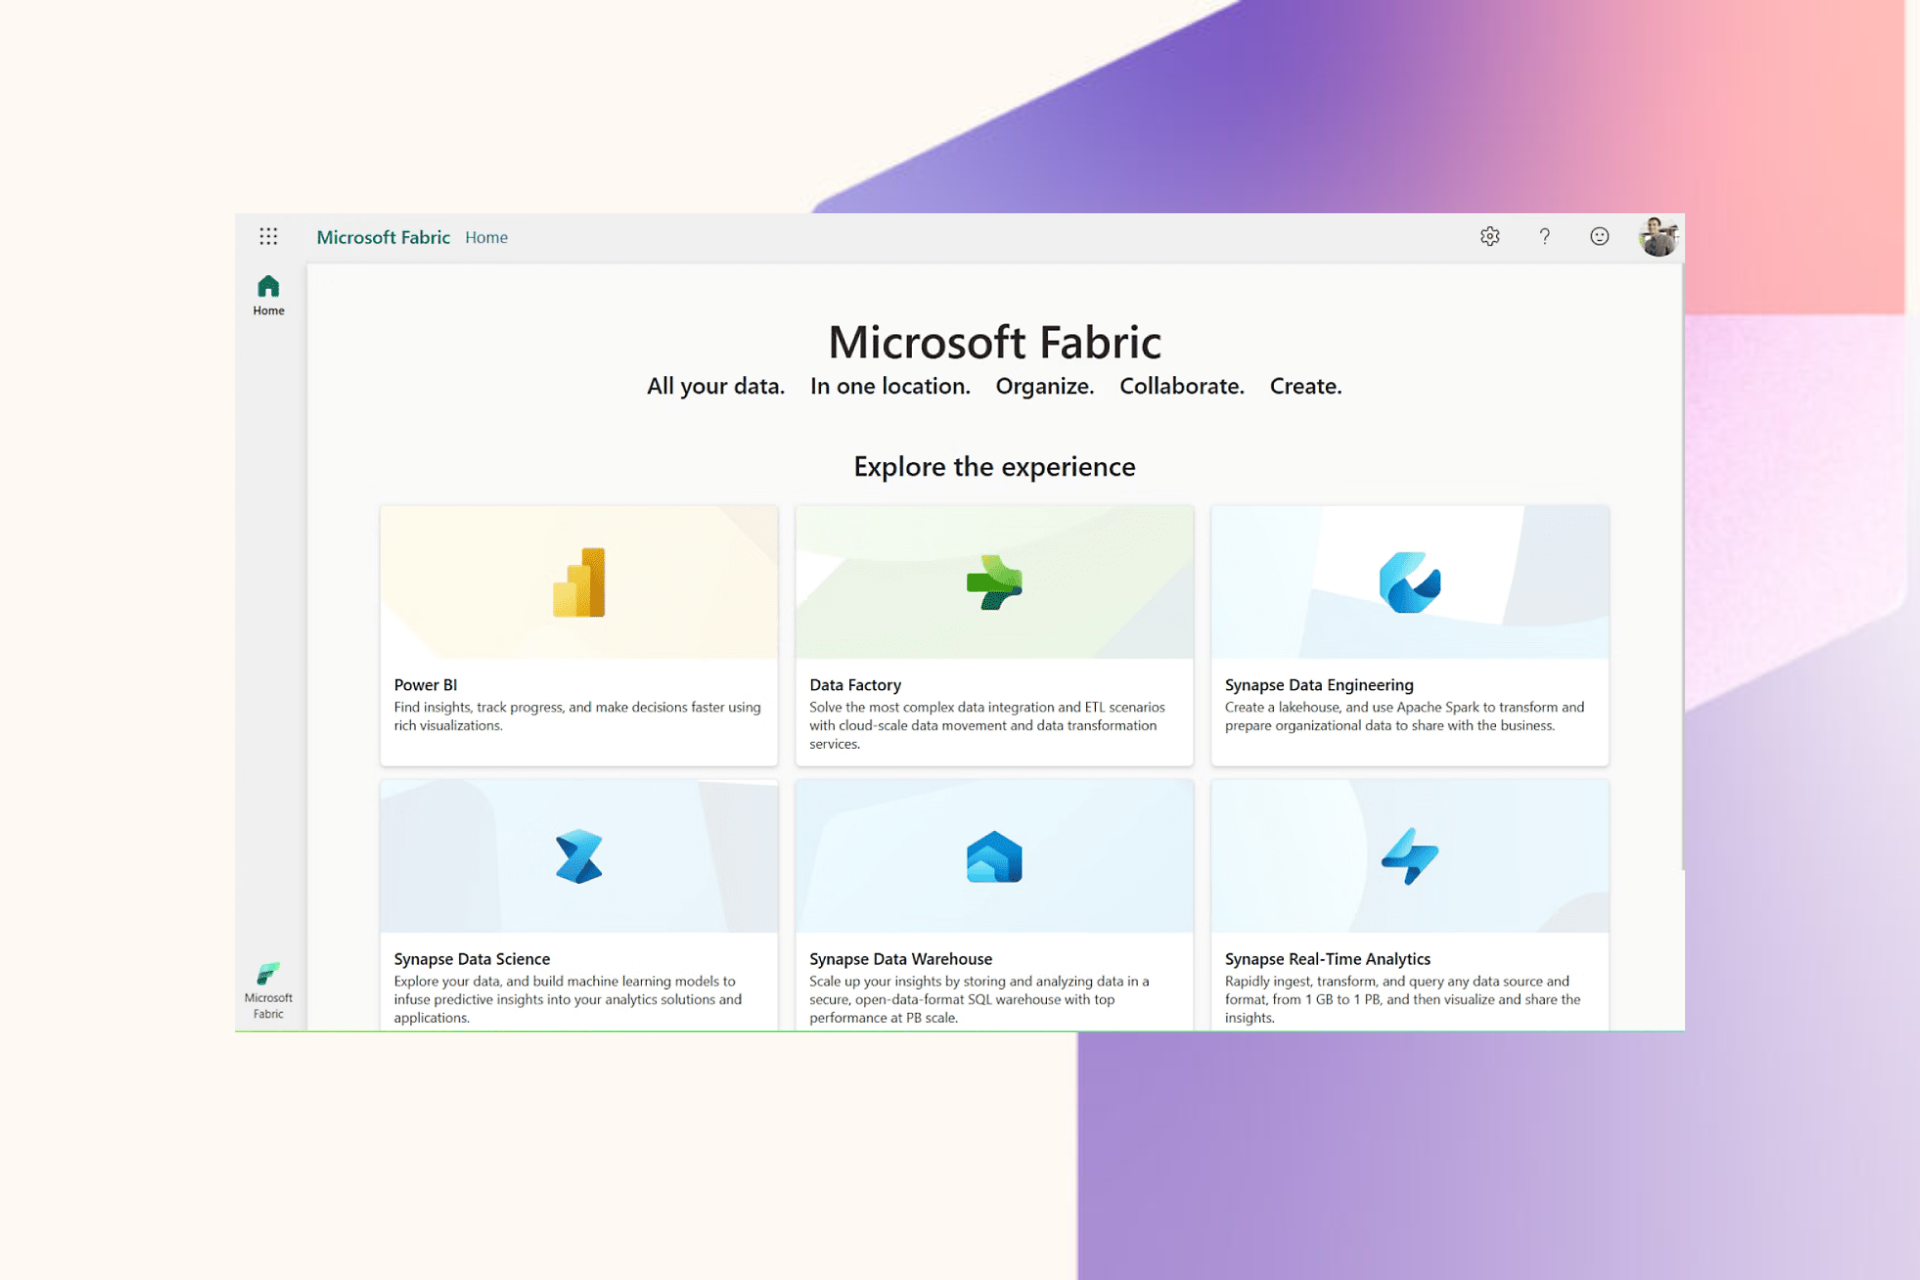 Microsoft Fabric introduces new security features